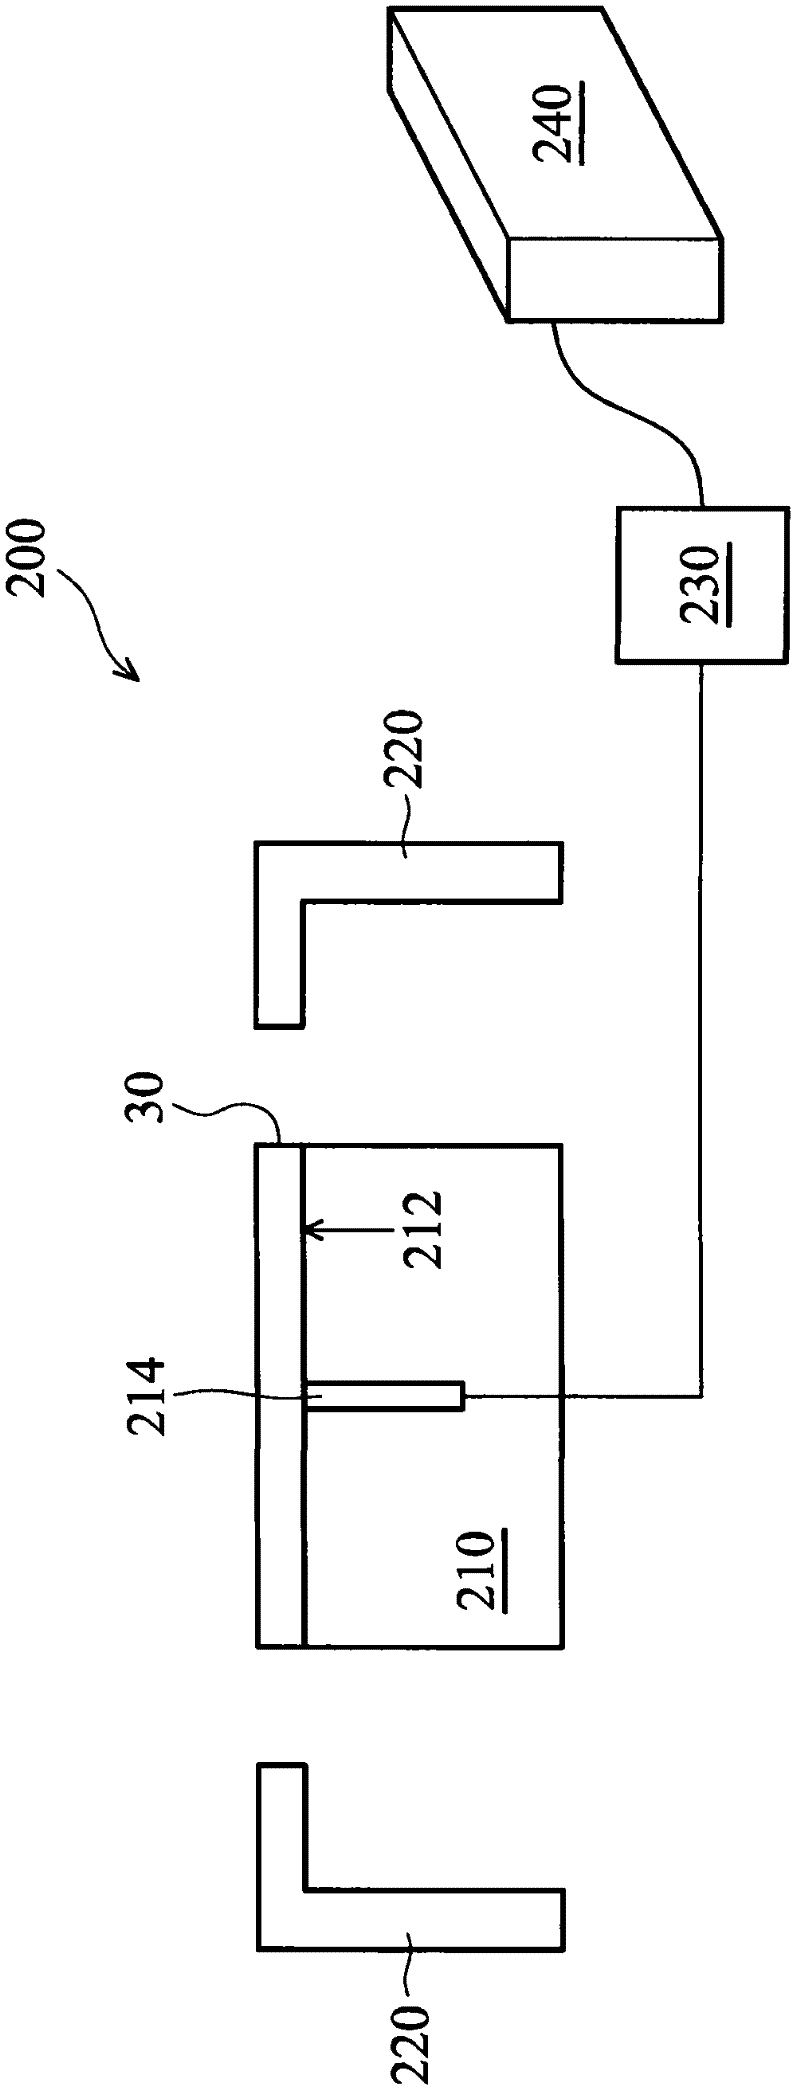 Semiconductor process processing system and method